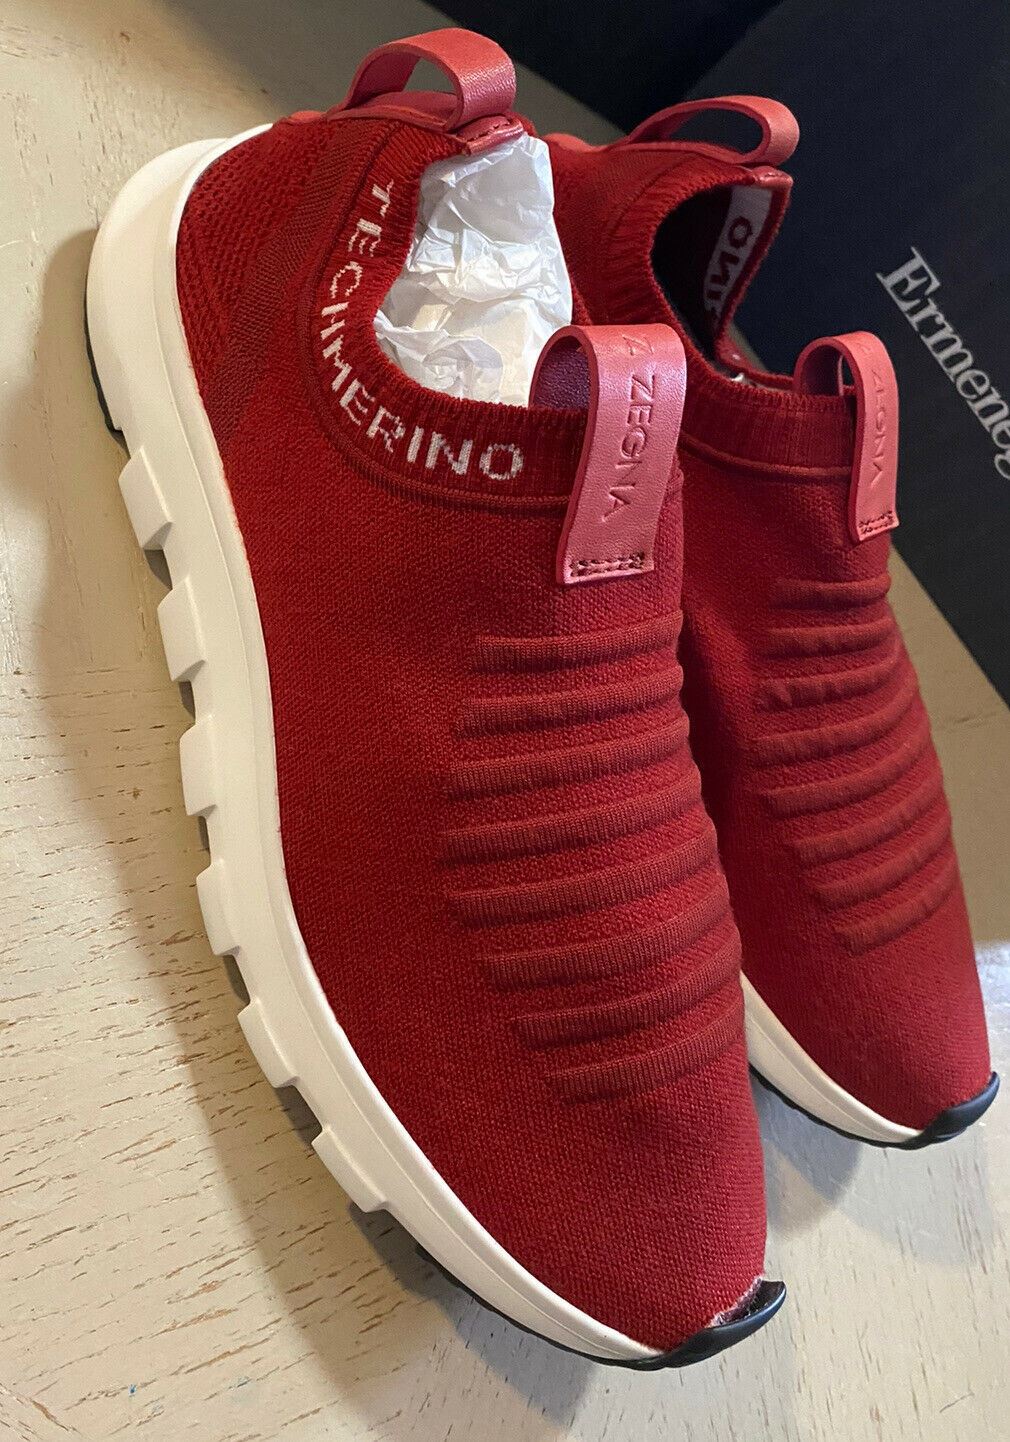 New  Z Zegna Techmerino Sneakers Shoes Red 9.5 US Italy